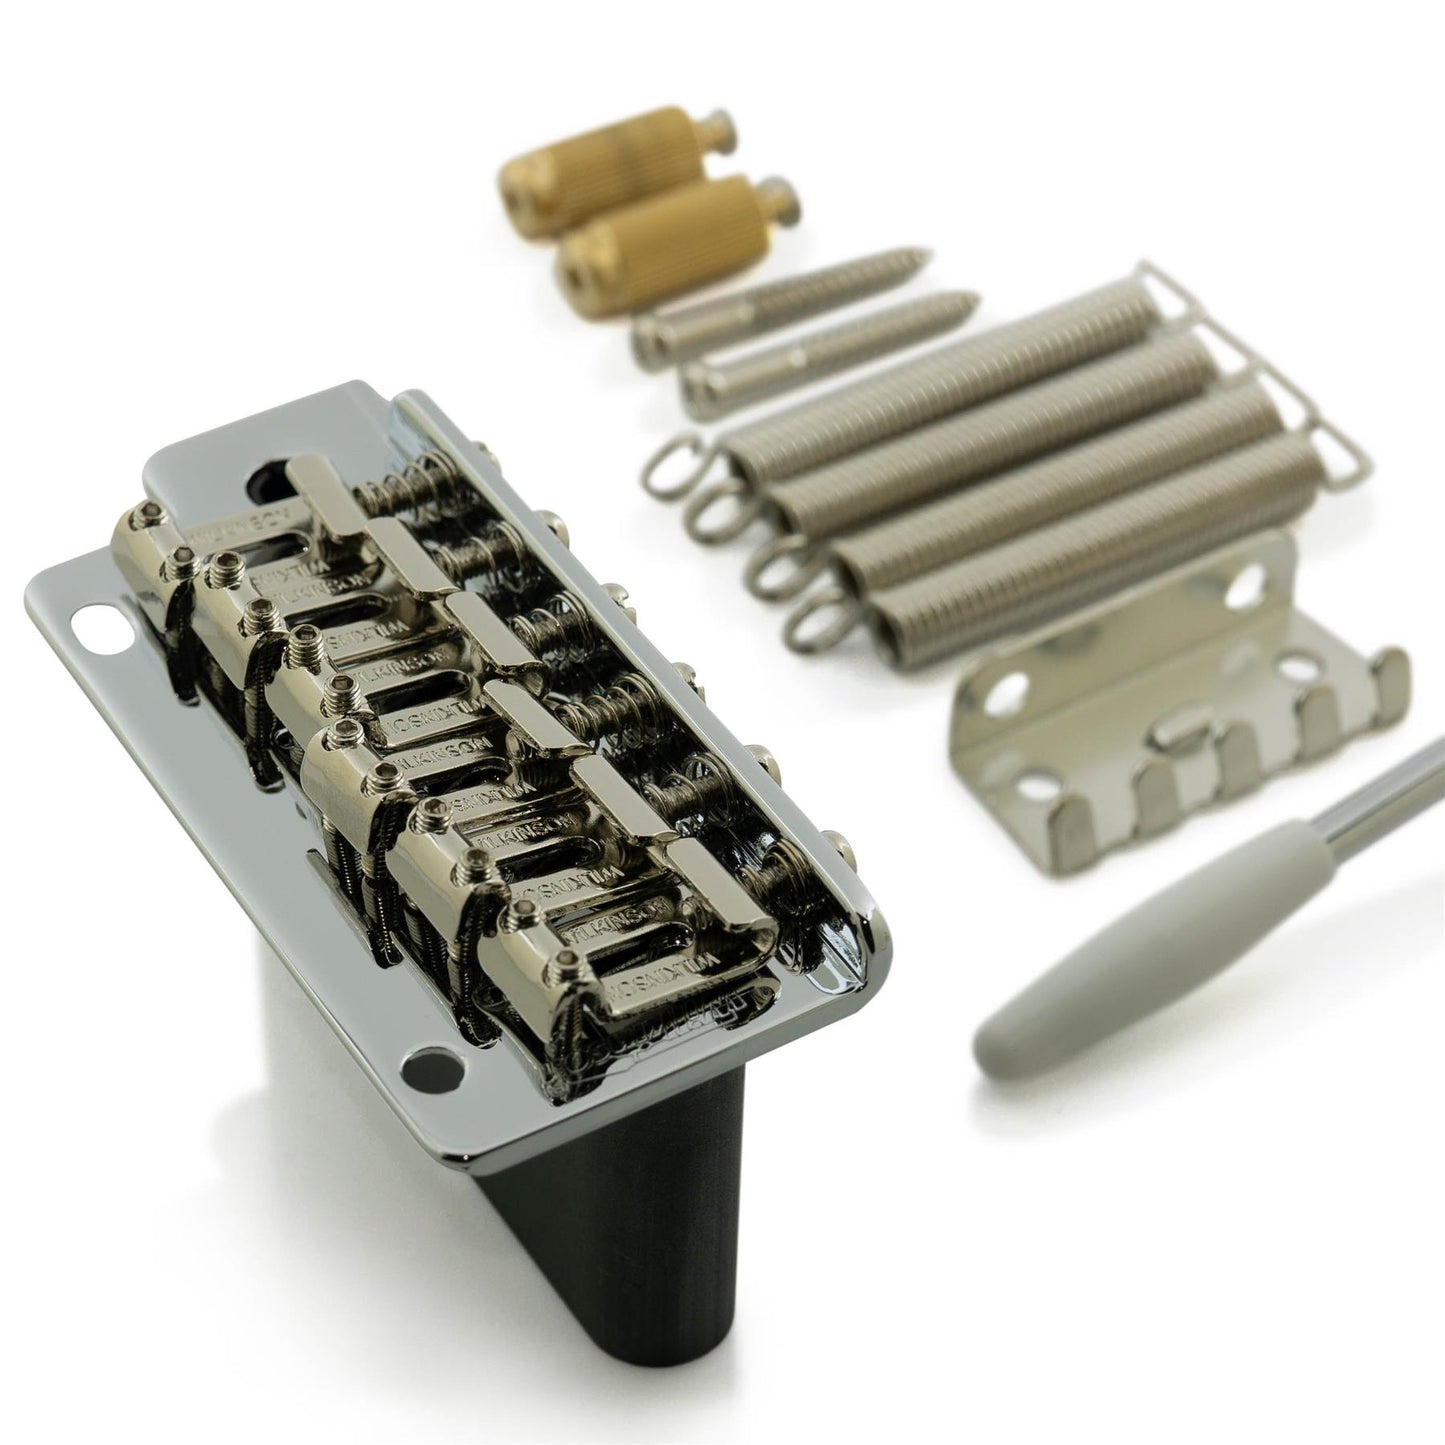 Wilkinson WV2 Stratocaster Tremolo with Solid Steel Block for Extra Sustain